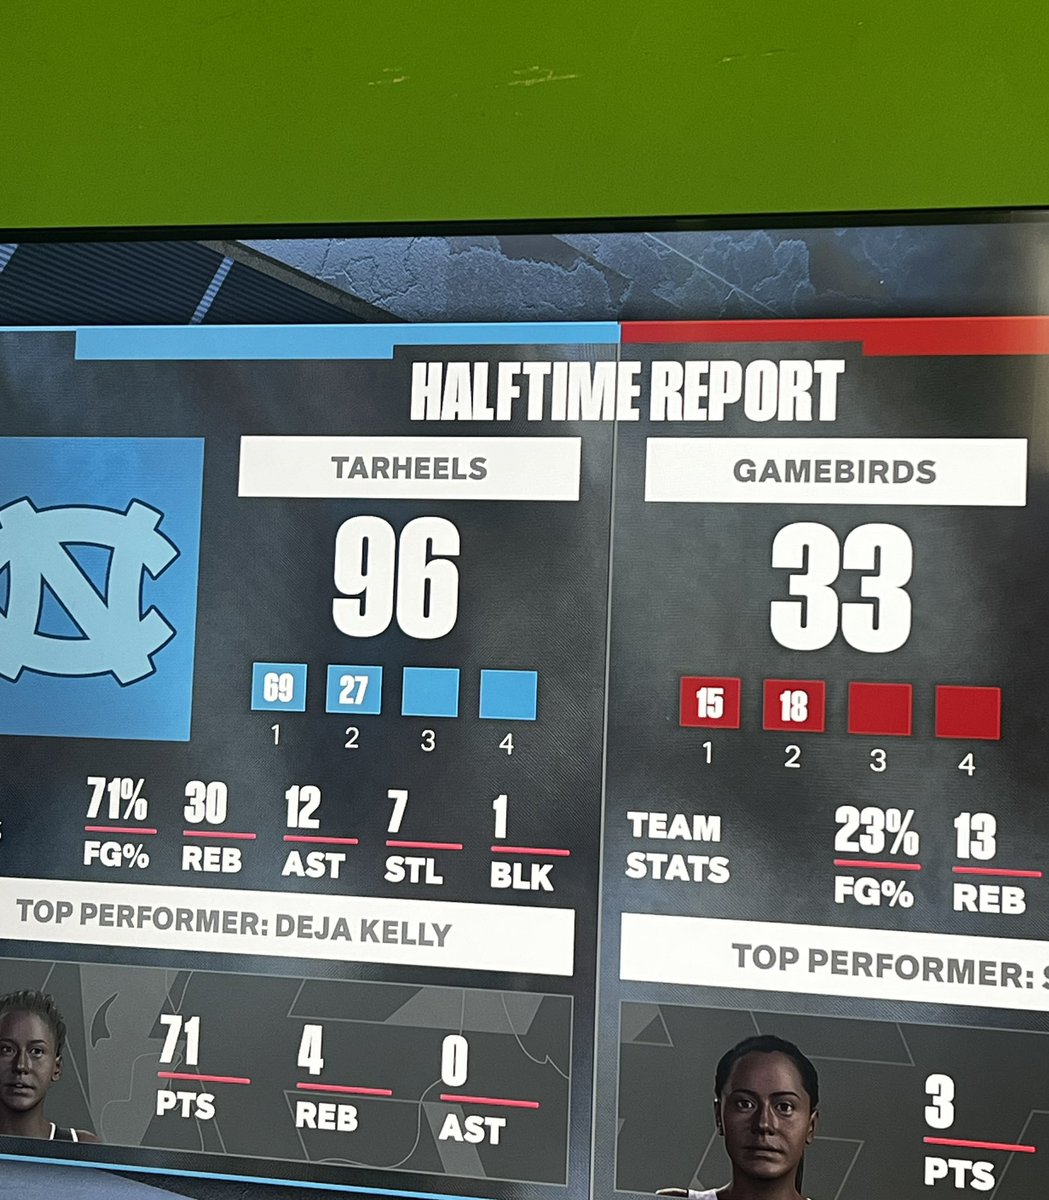 At half time #UncTarheels lead the #southcarolinagamecocks 96-33 in a shocker upset ….. can dawn figure a way to stop deja and this red hot offense ? Or is South Carolina season over ?